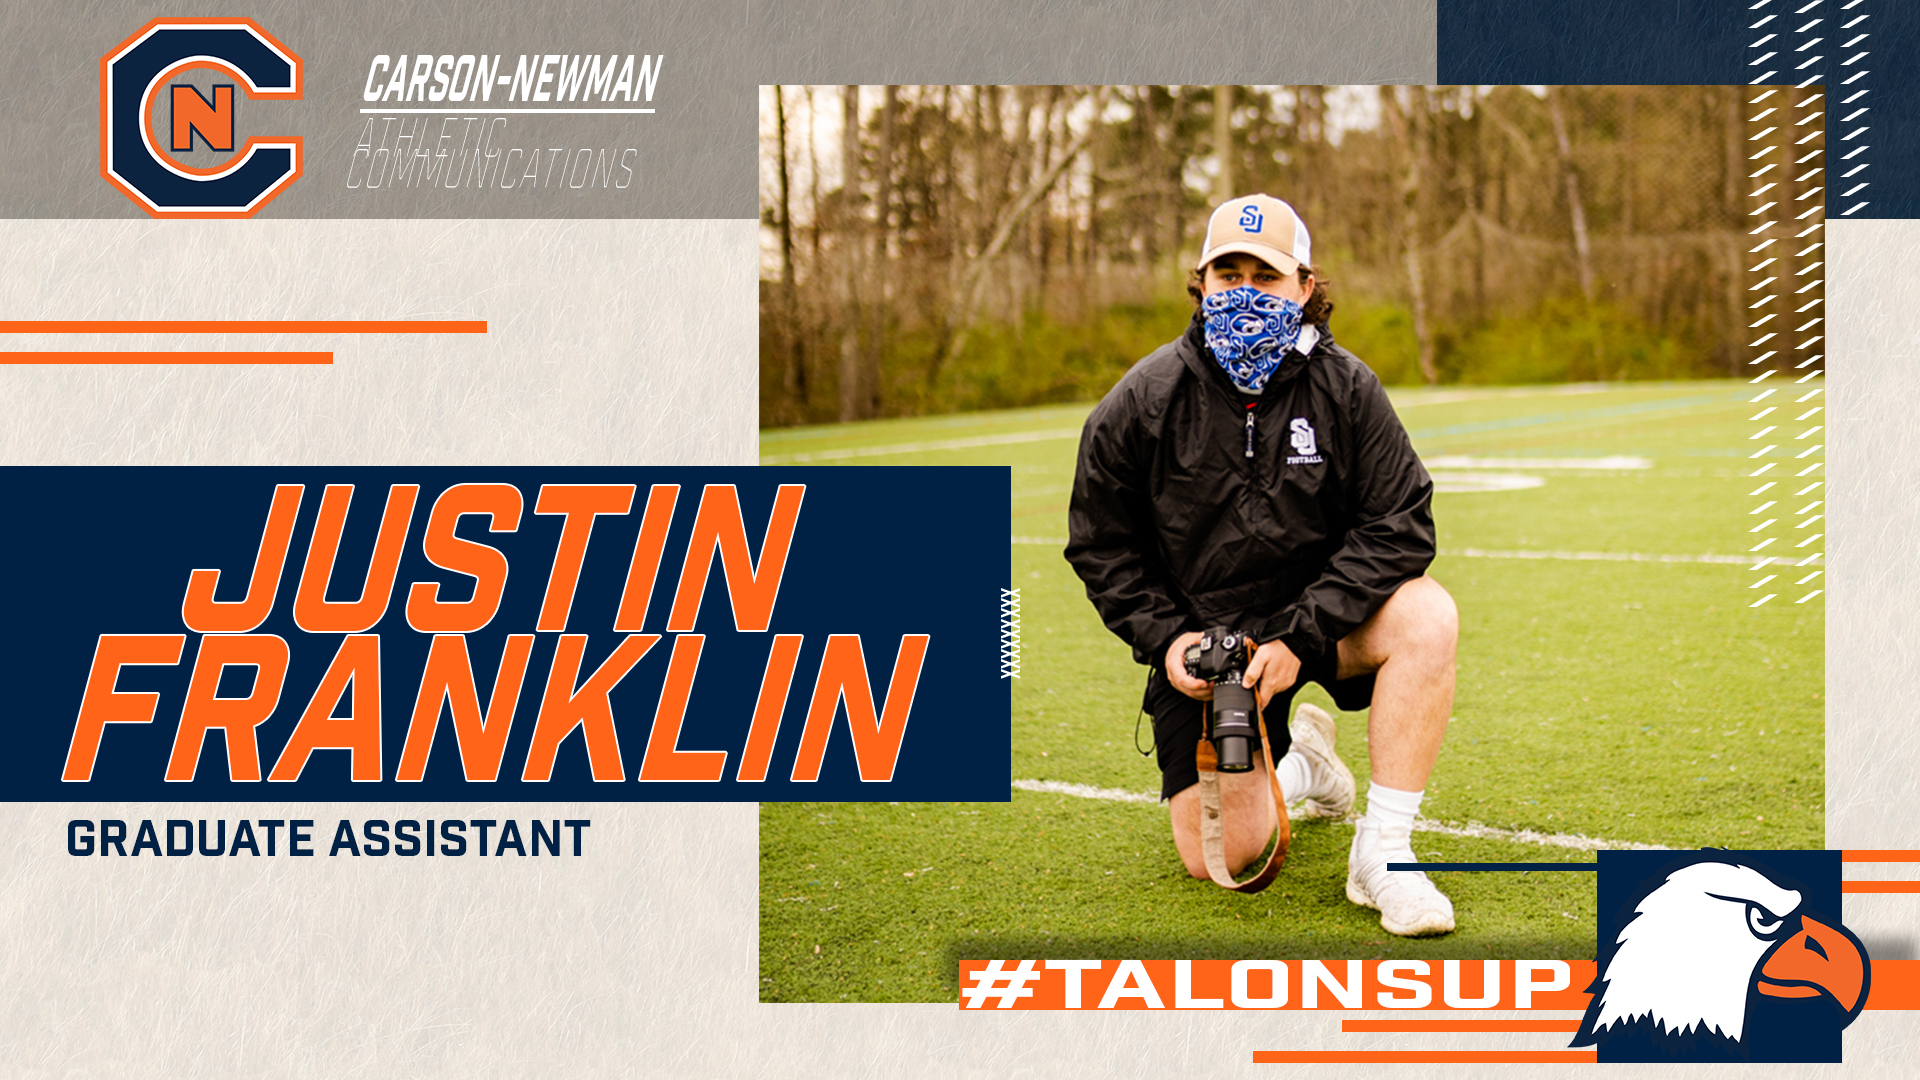 Franklin joins Carson-Newman Athletic Communications team